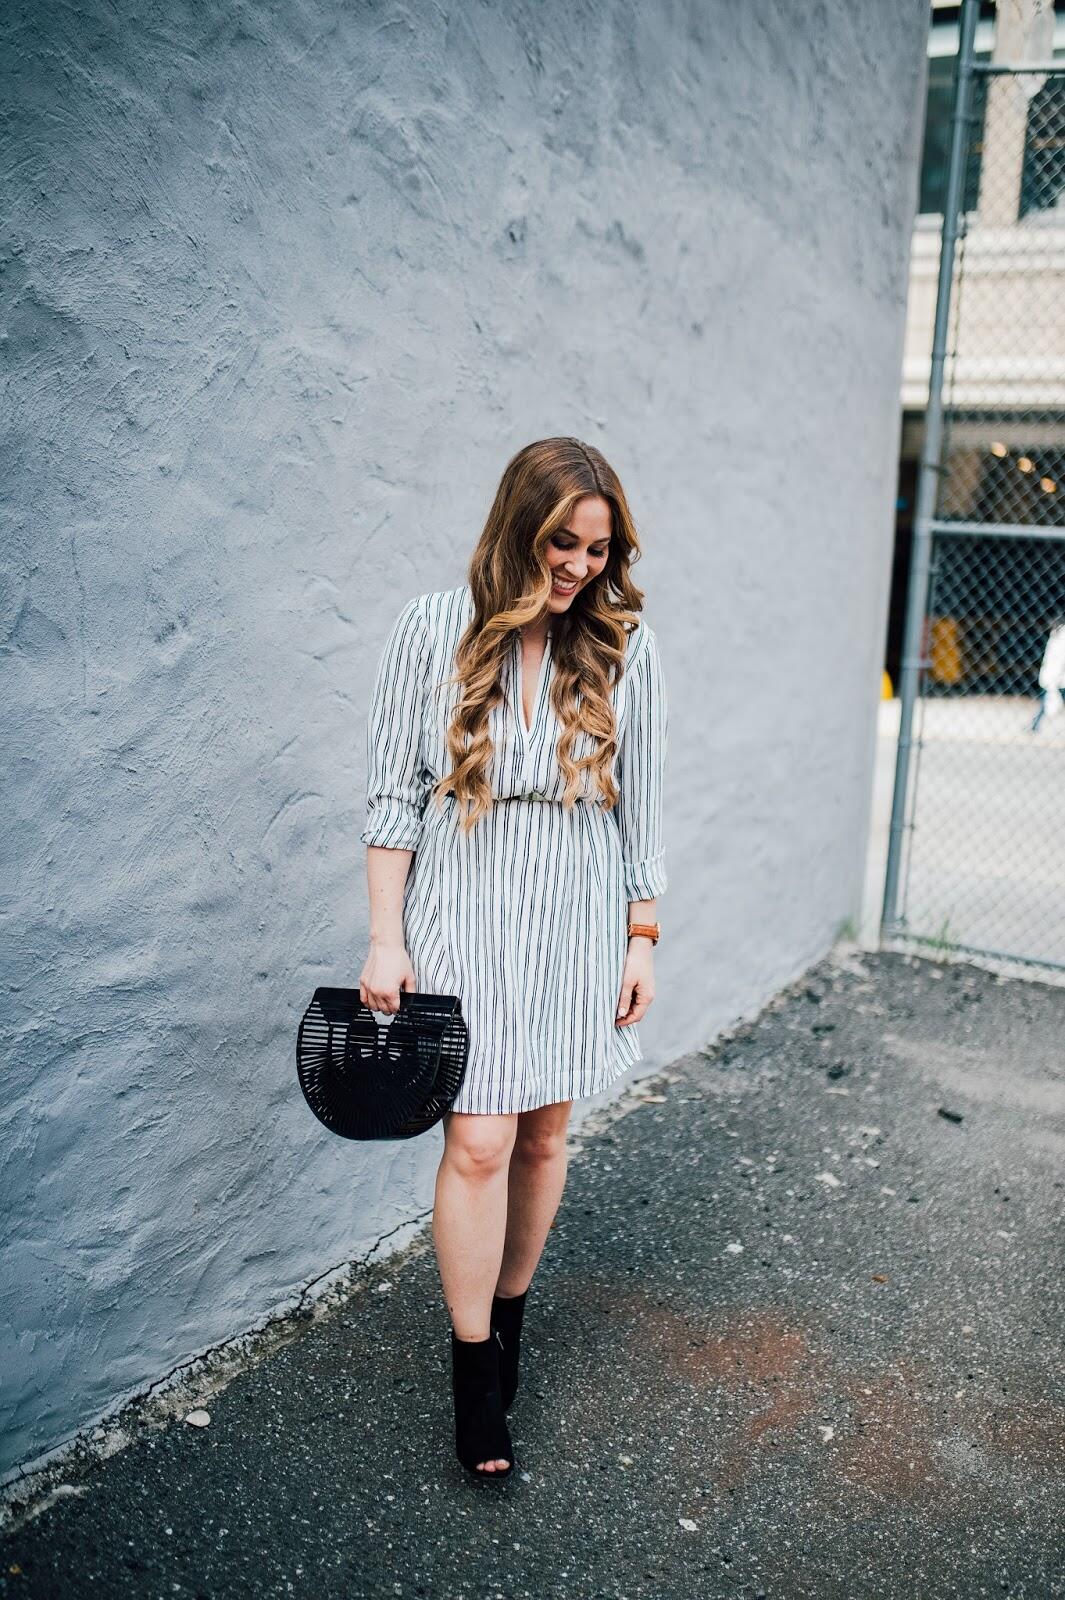 Trend Spin Linkup - Statement Accessories by fashion blogger Laura of Walking in Memphis in High Heels